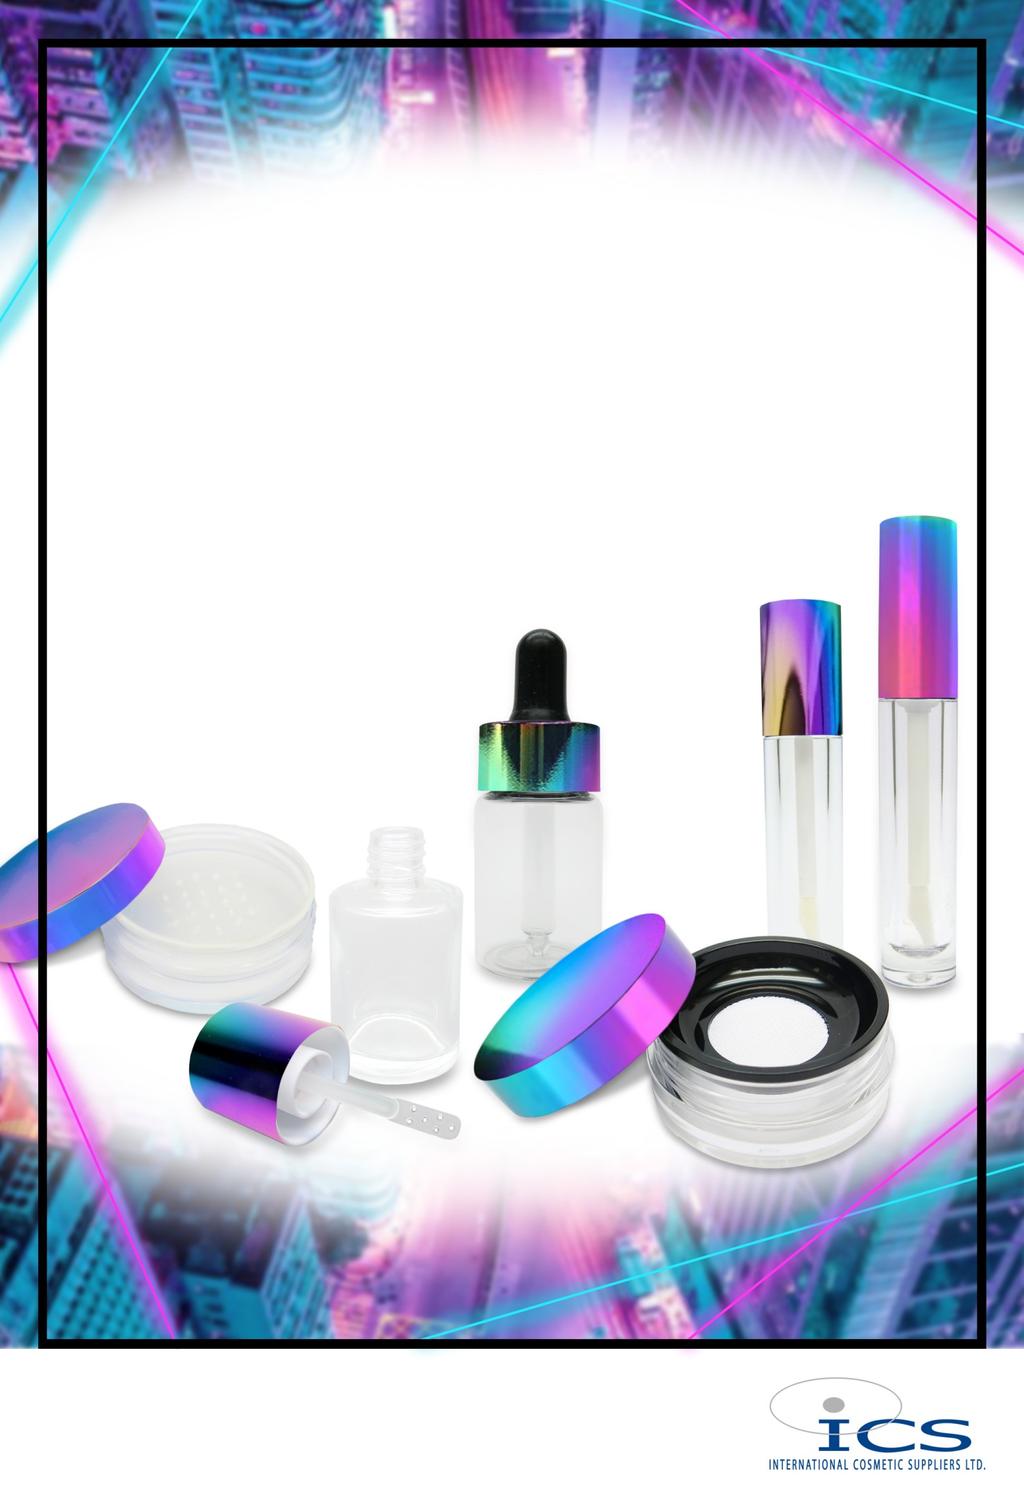 Oil Slick Finish Dark and rich, this rainbow iridescent oil slick finish is the hottest finish on the market right now to give your pack the coolest urban vibes.